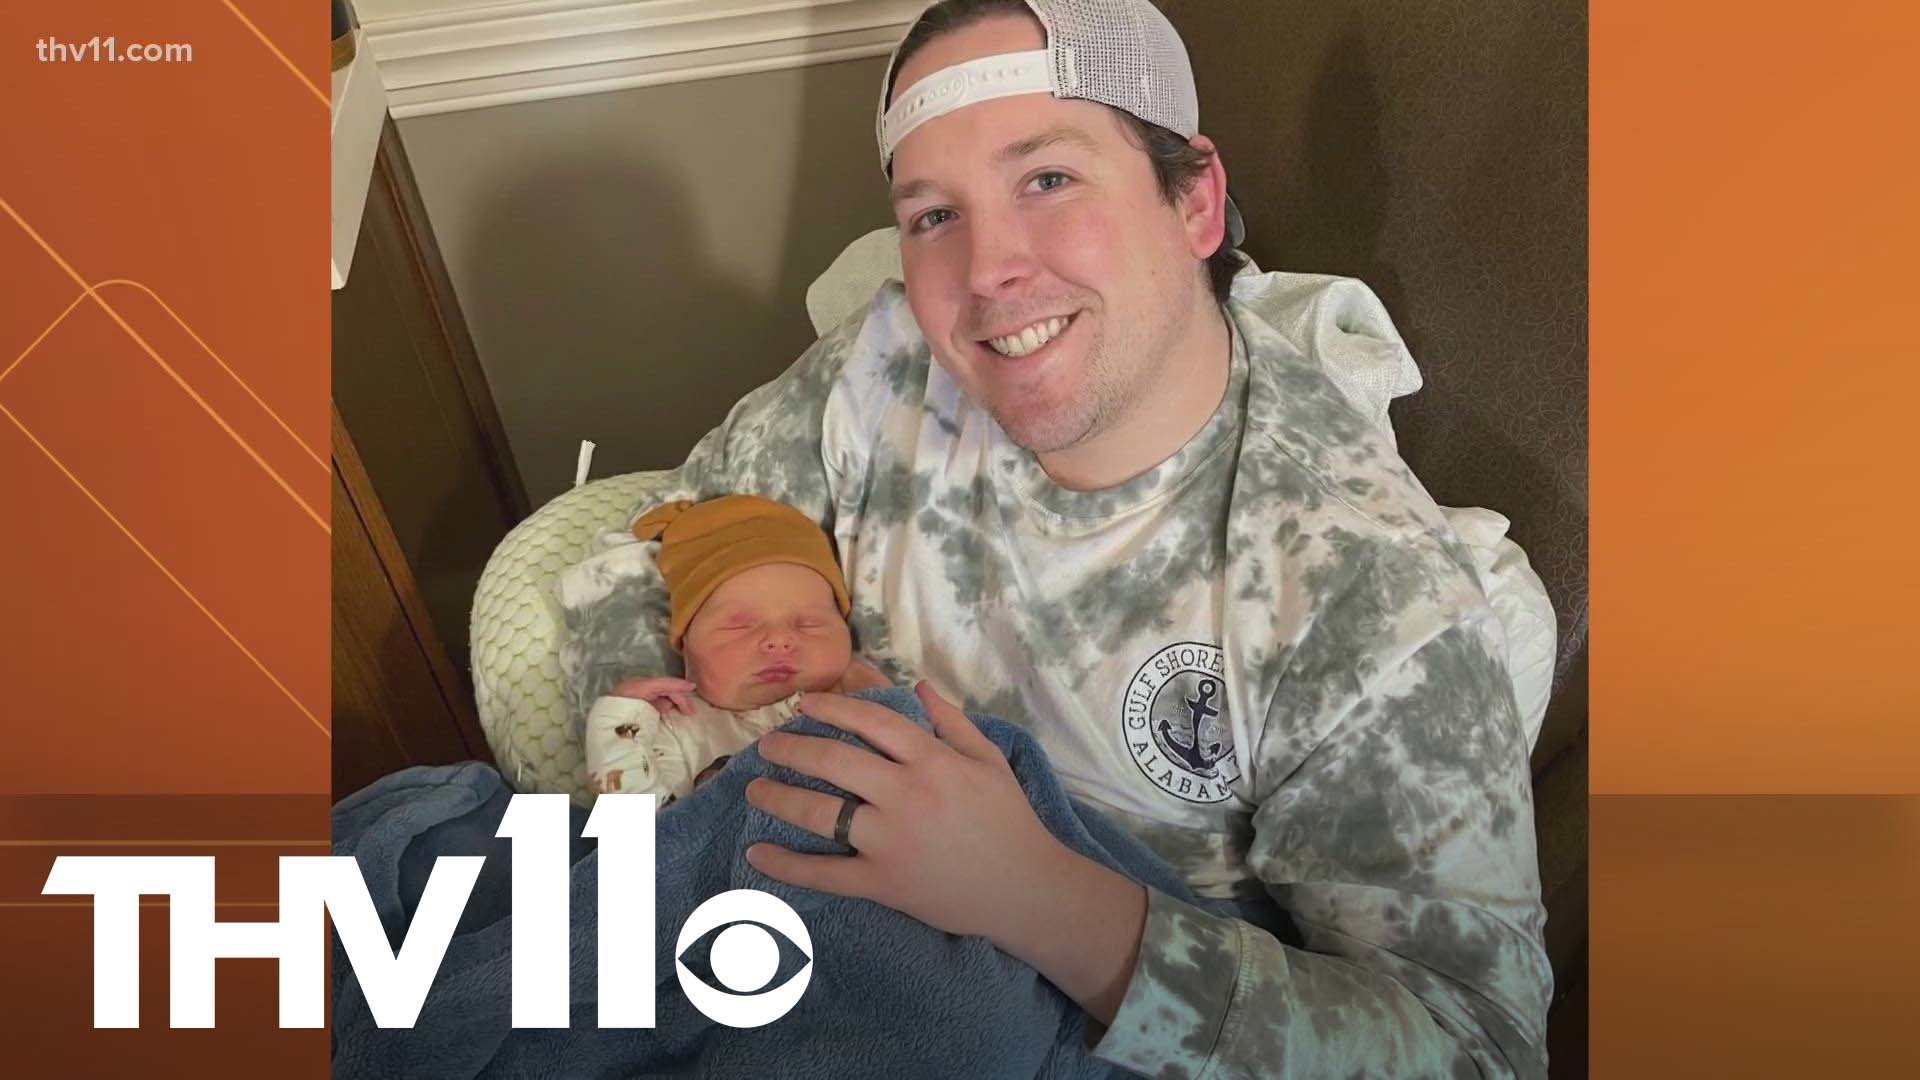 The announcement we've been waiting 9 months for is finally here— the THV11 team welcomed Tanner Balgavy to the world as Hayden became a father over the weekend.